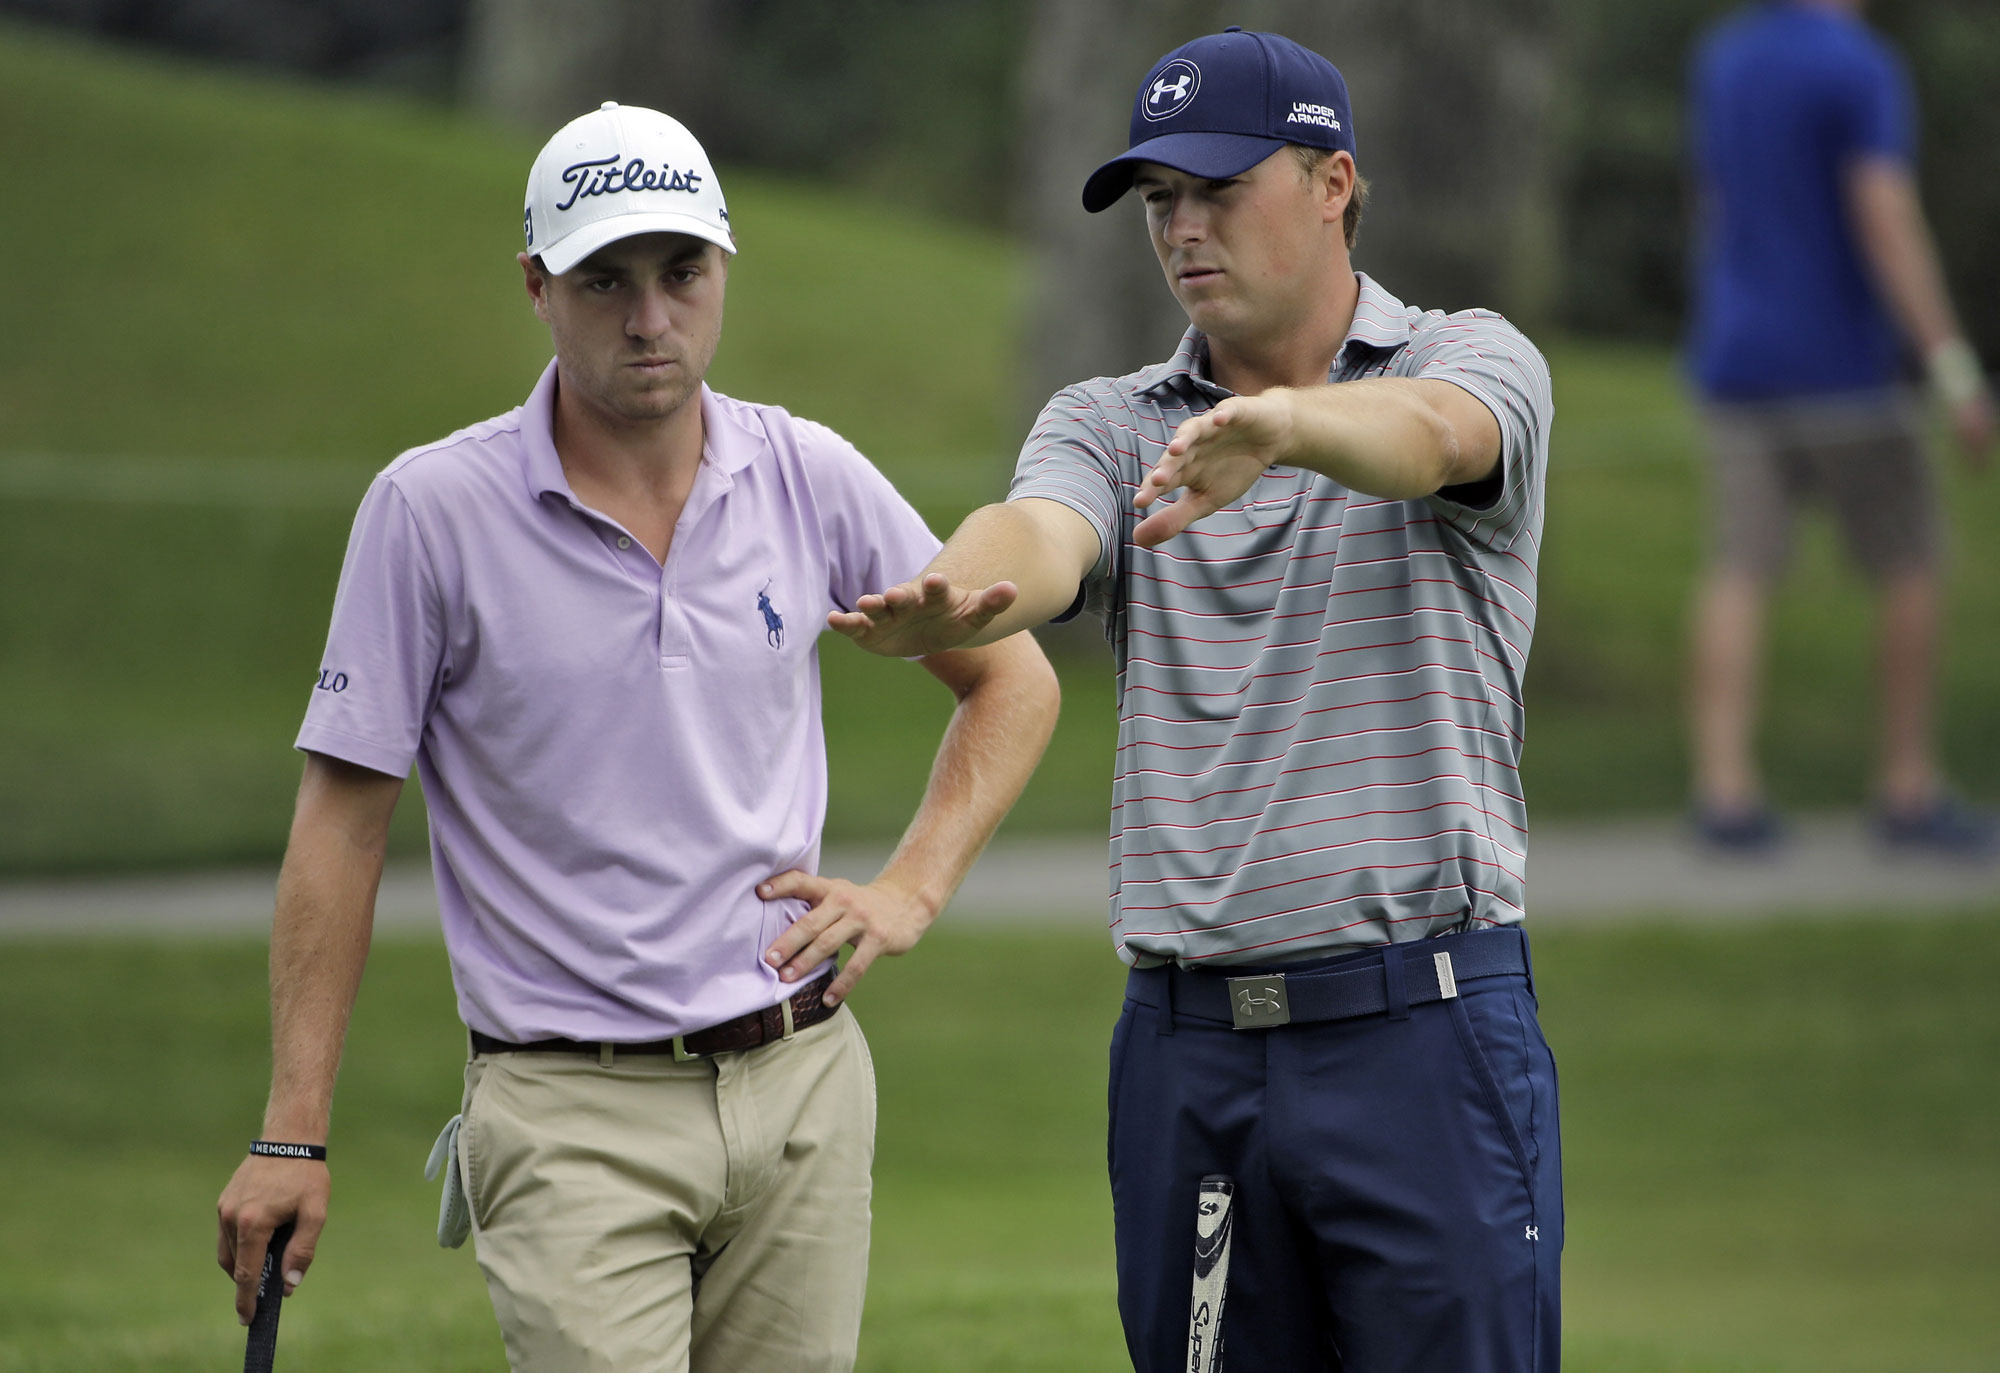 Jordan Spieth Just One Piece Of The 2016 Major Youth Movement